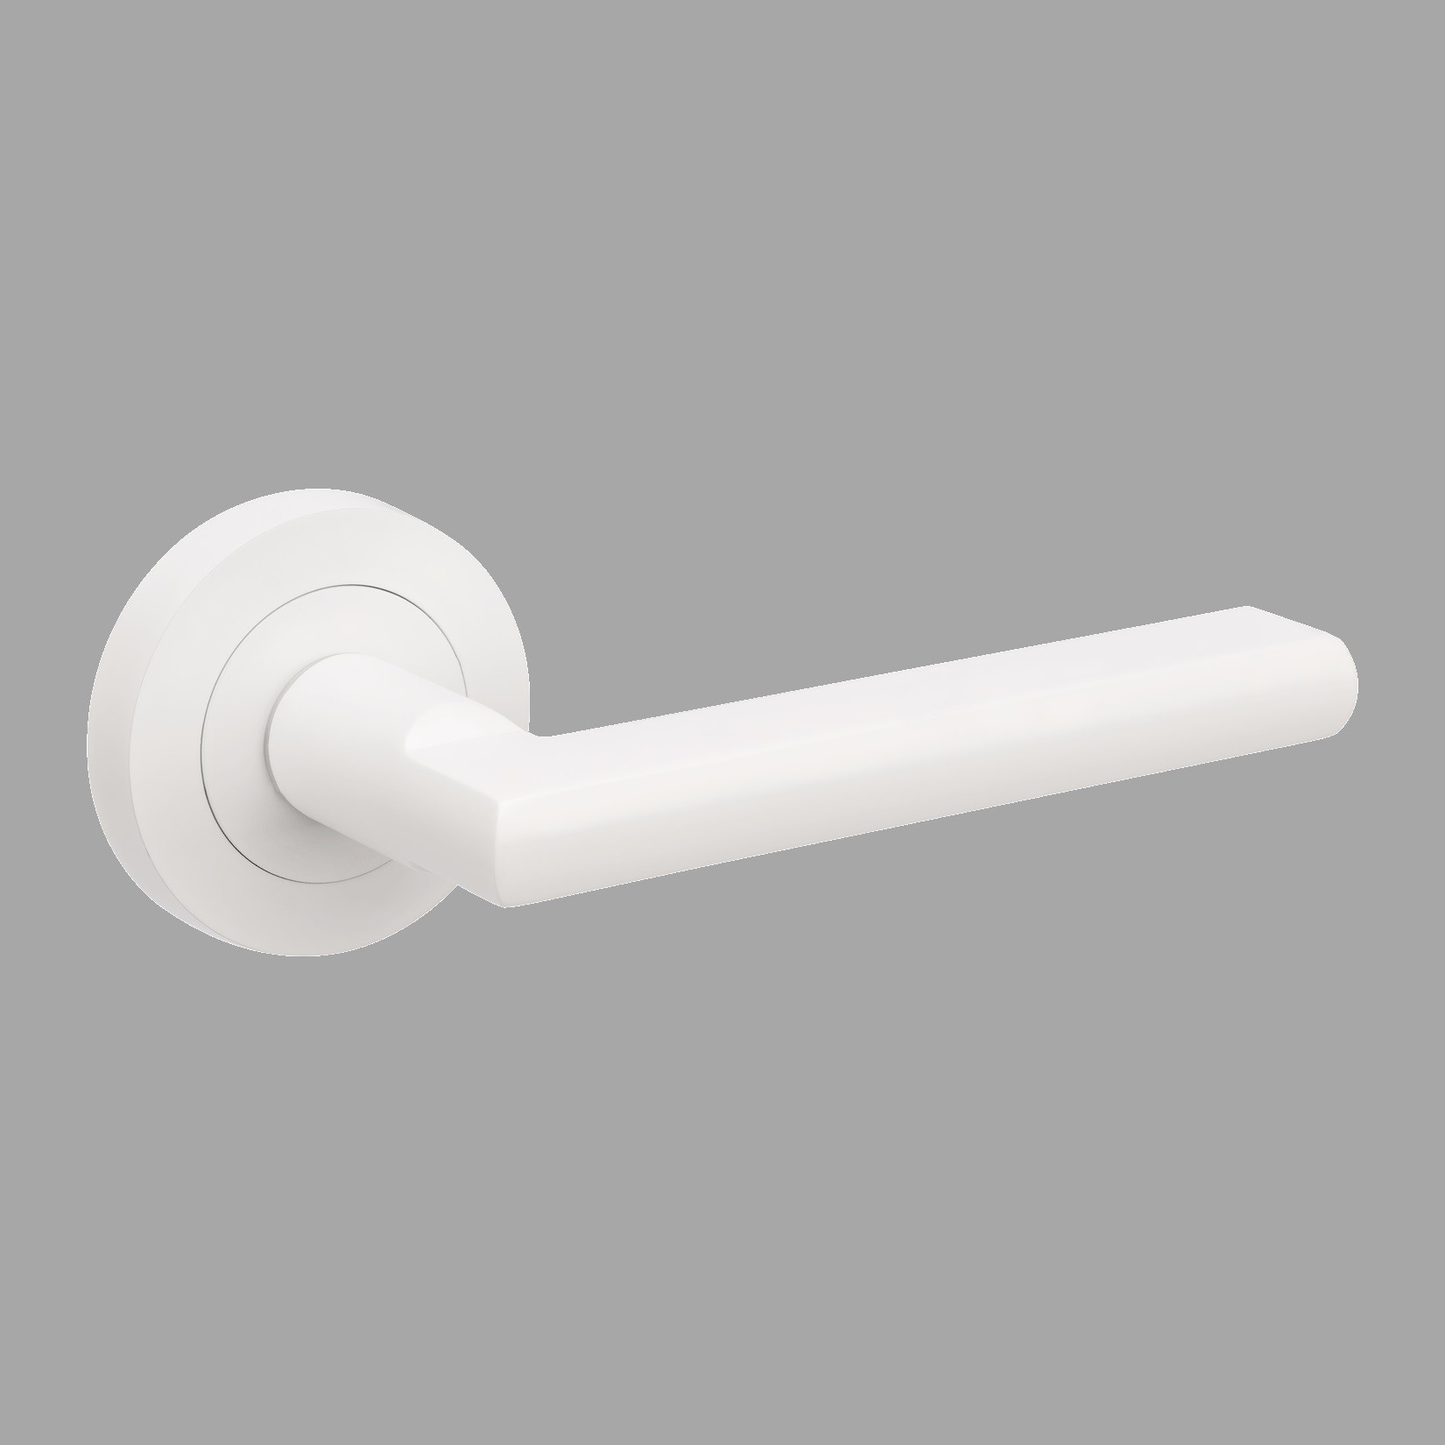 Up close product picture of the Epic White Door Handle on a grey background.